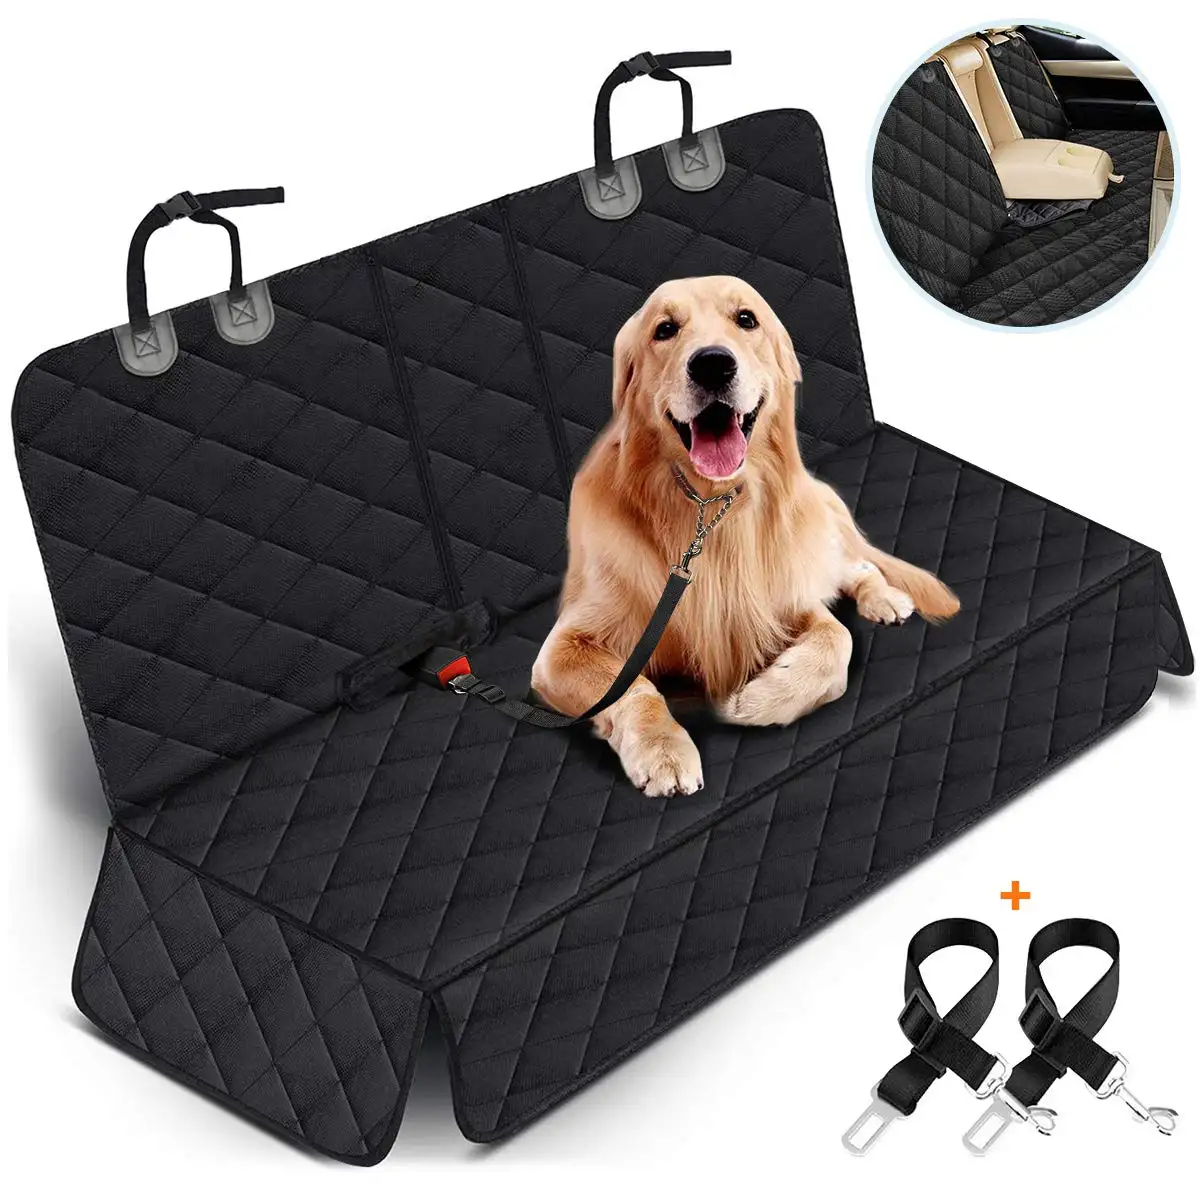 China Car Pet Beds back Booster High Quality Anti-collision Portable Travel Dogs Car Seat cover For Outdoor